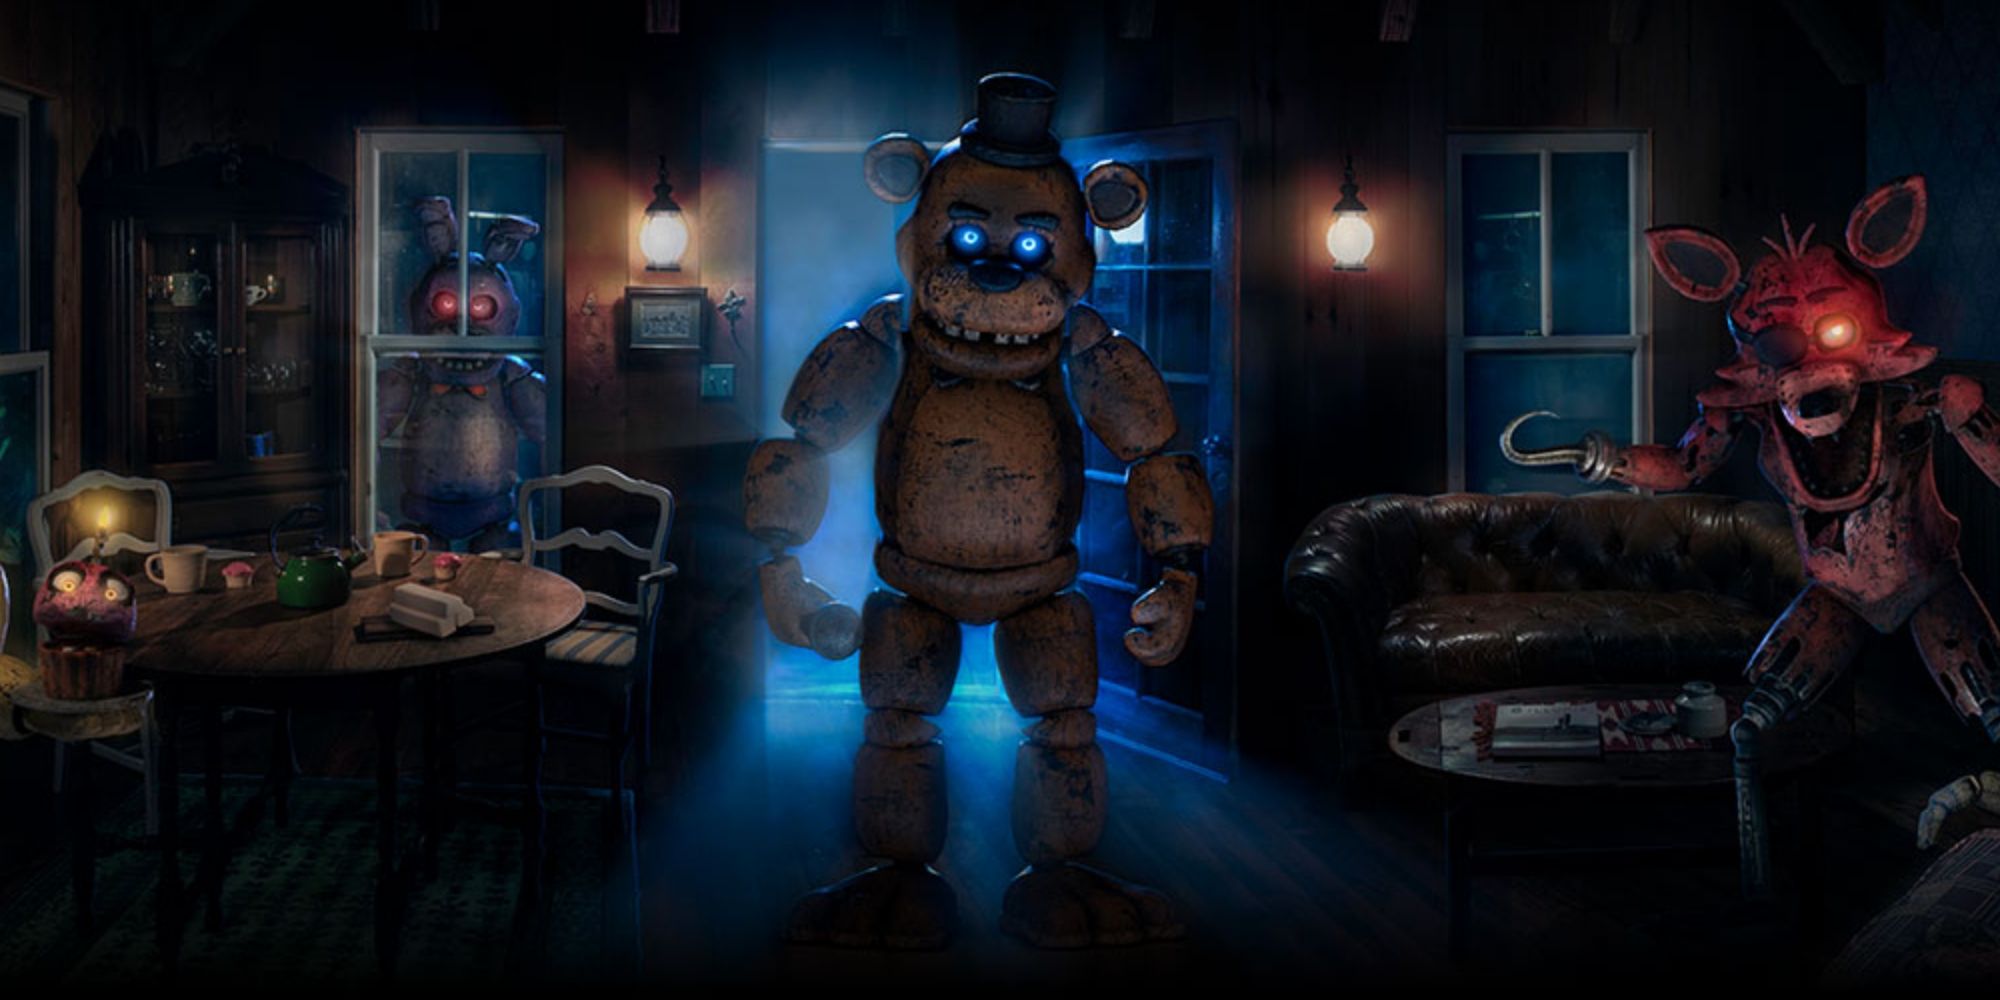 Inside a house, four animatronics can be seen staring threateningly at the camera